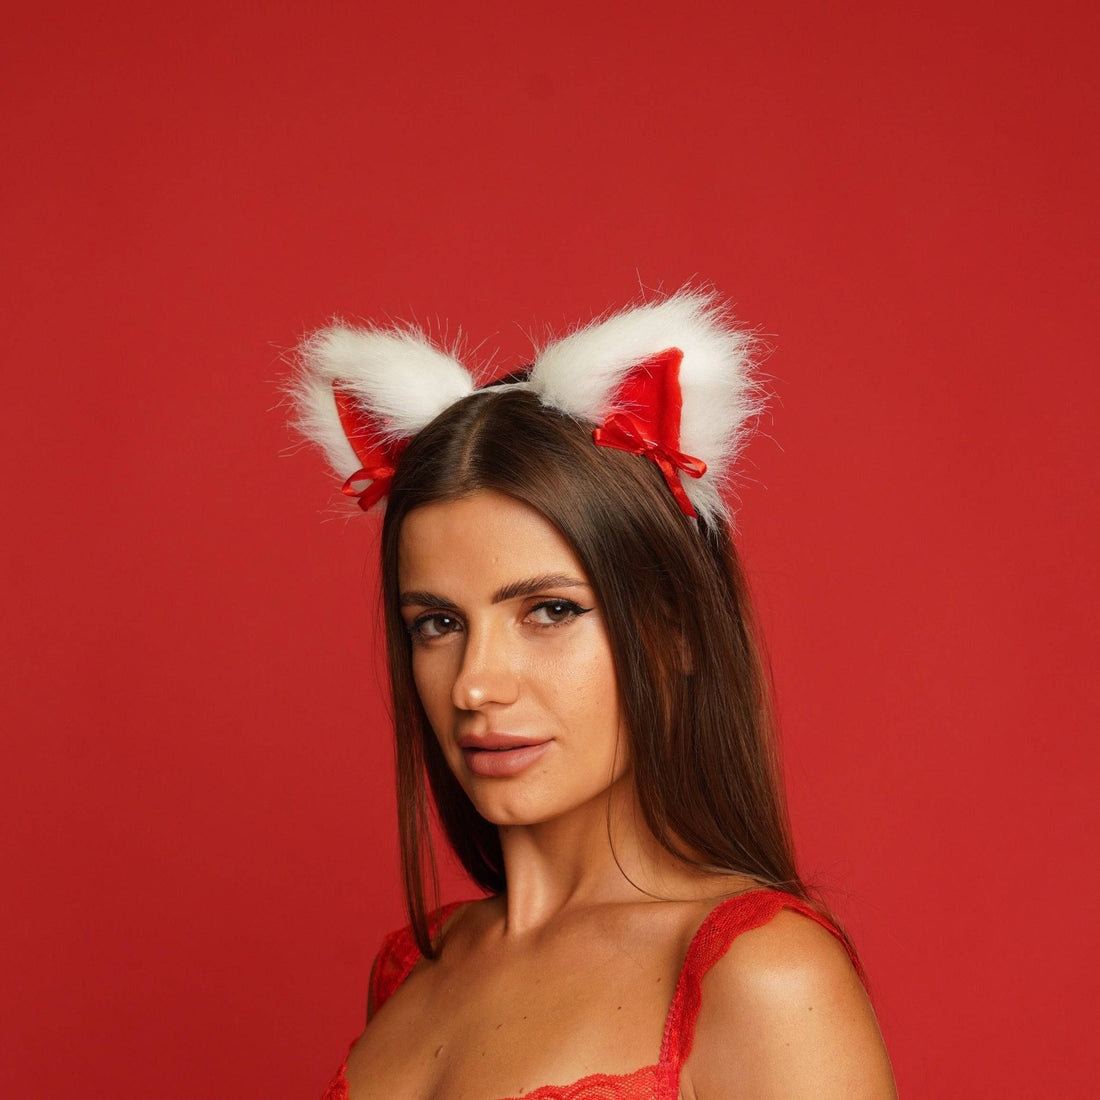 Kitten ears white with red tip and red ribbons - OKOVA